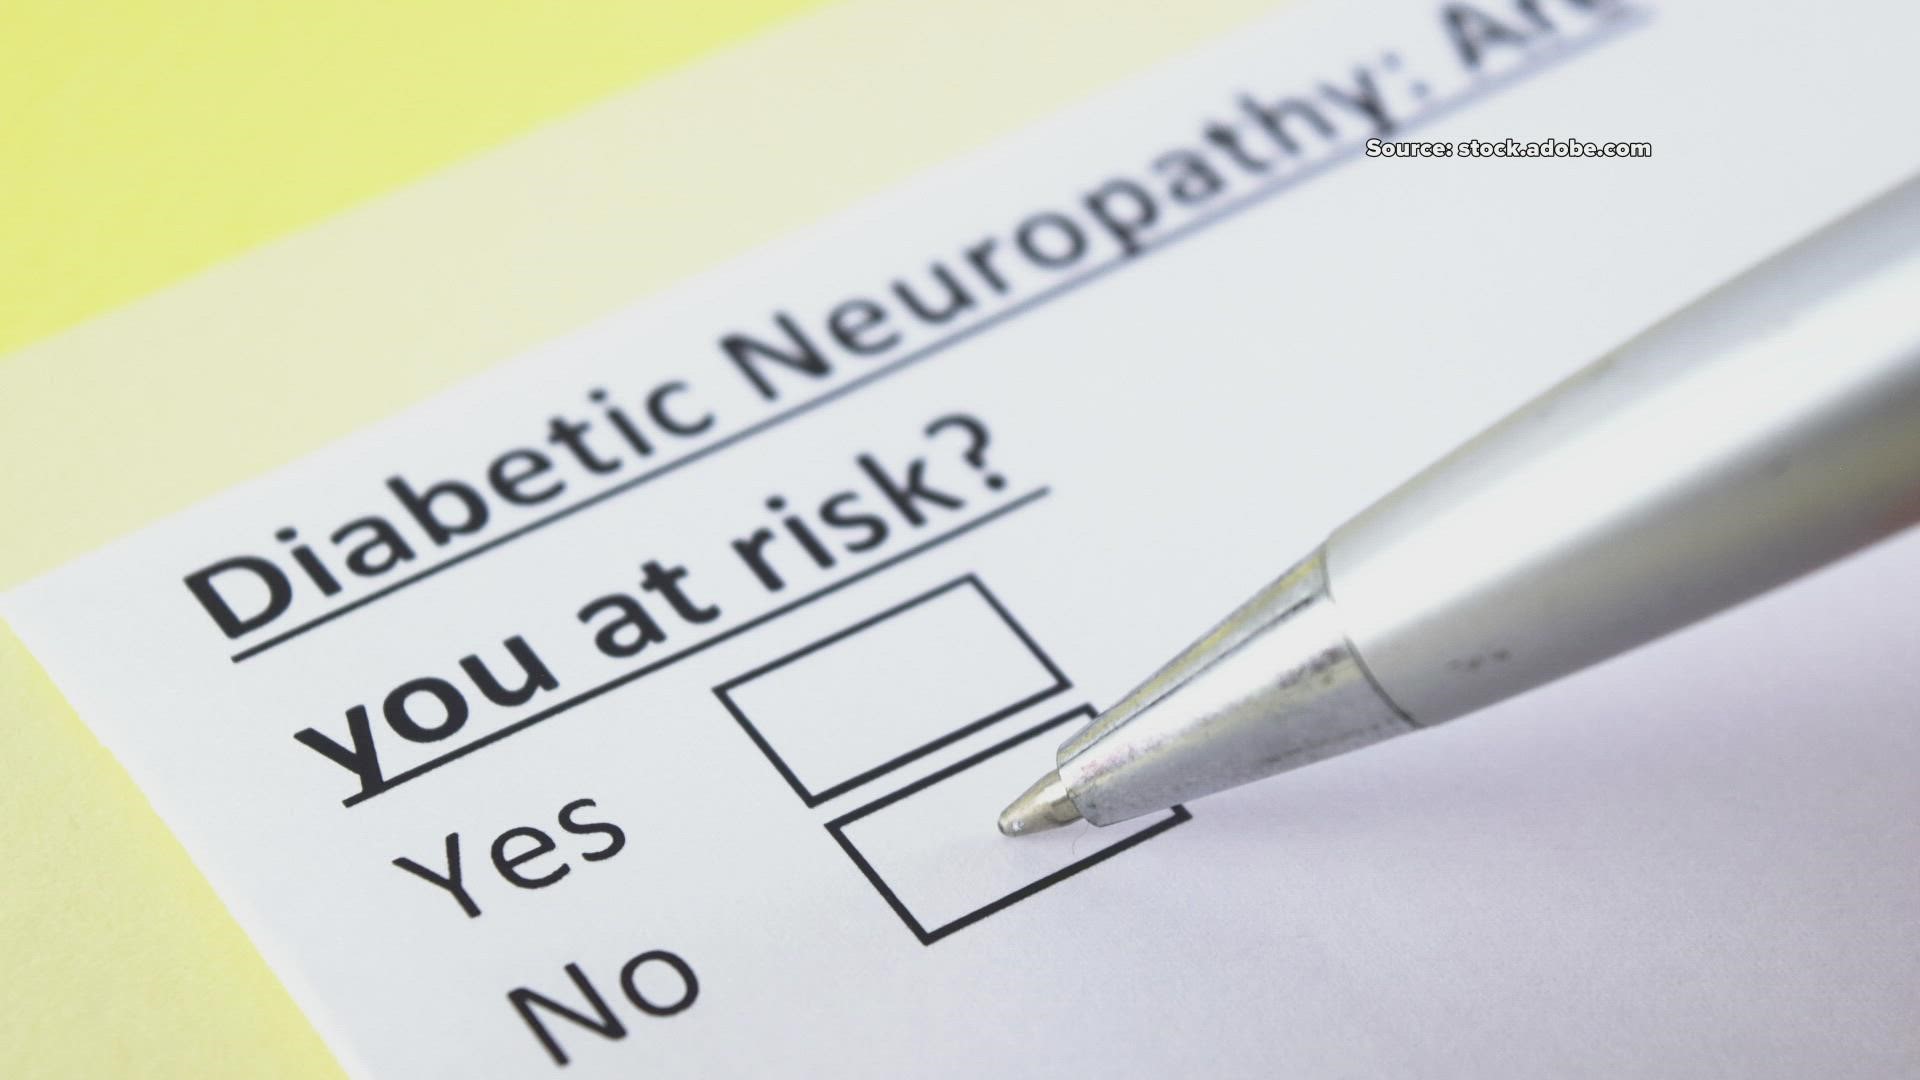 If left untreated, diabetic neuropathy can lead to pain, foot ulcers, and even lower limb amputation.